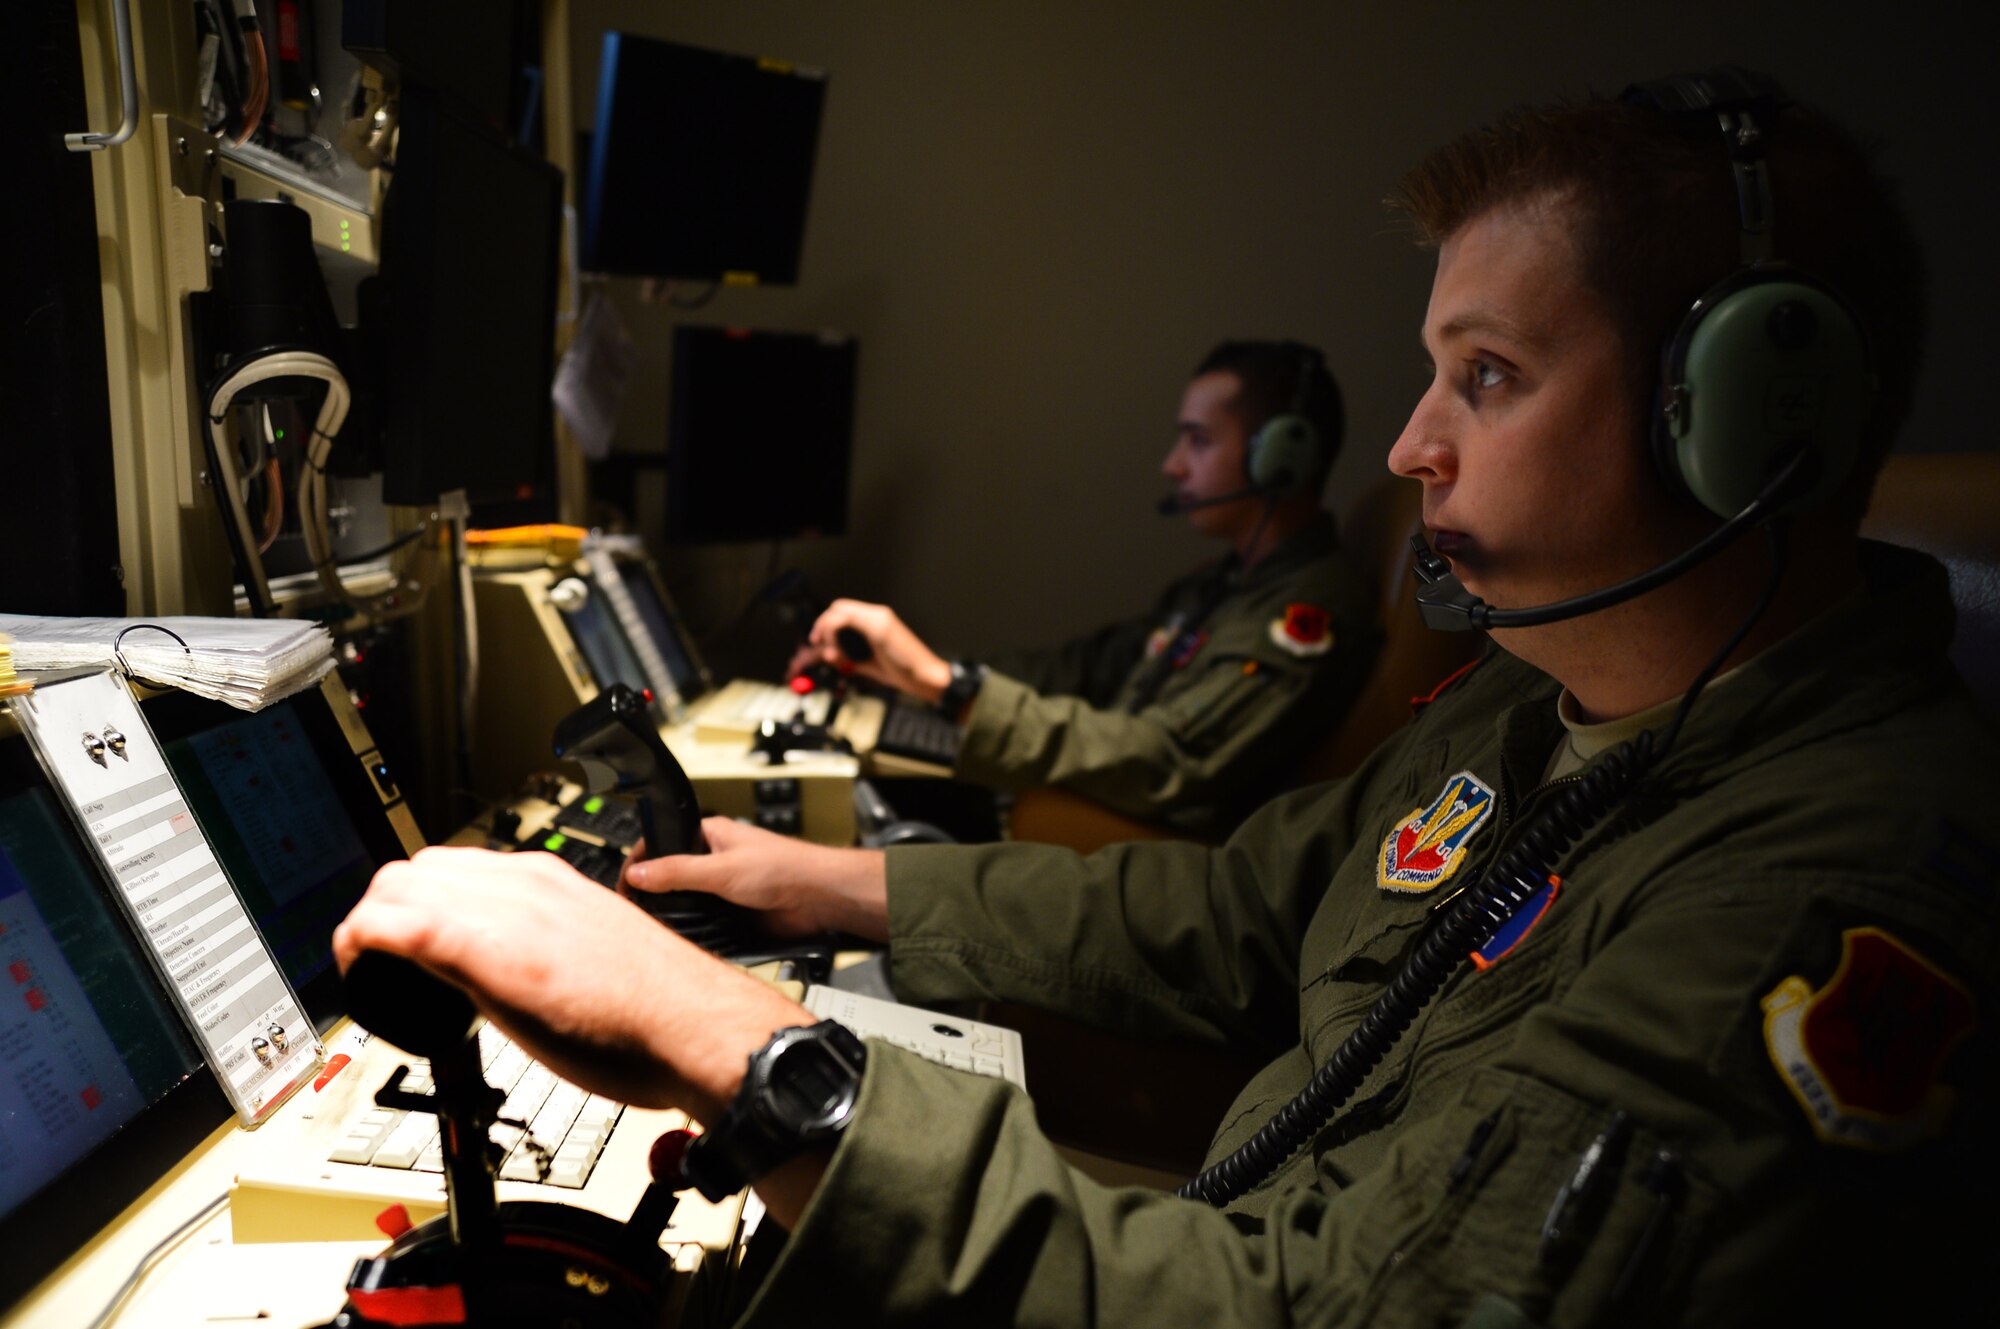 Capt. Ben (front), 432nd Wing/432nd Air Expeditionary Wing Remotely Piloted Aircraft pilot, and Senior Airman Travis, 432nd Wing/432nd AEW RPA sensor operator, fly an MQ-1 Predator during the wing’s 2 million flying hour milestone Oct. 22, 2013.  The wing flew its first 1 million hours in April 2011. The wing’s 2 million hour mark was achieved 32 months later, culminating in more than 215,000 total missions completed and nearly 94 percent of all missions flown in support of major combat operations due in large part to total force integration efforts and an expansion of combat air patrols. (U.S. Air Force photo by Staff Sgt. N.B./released)